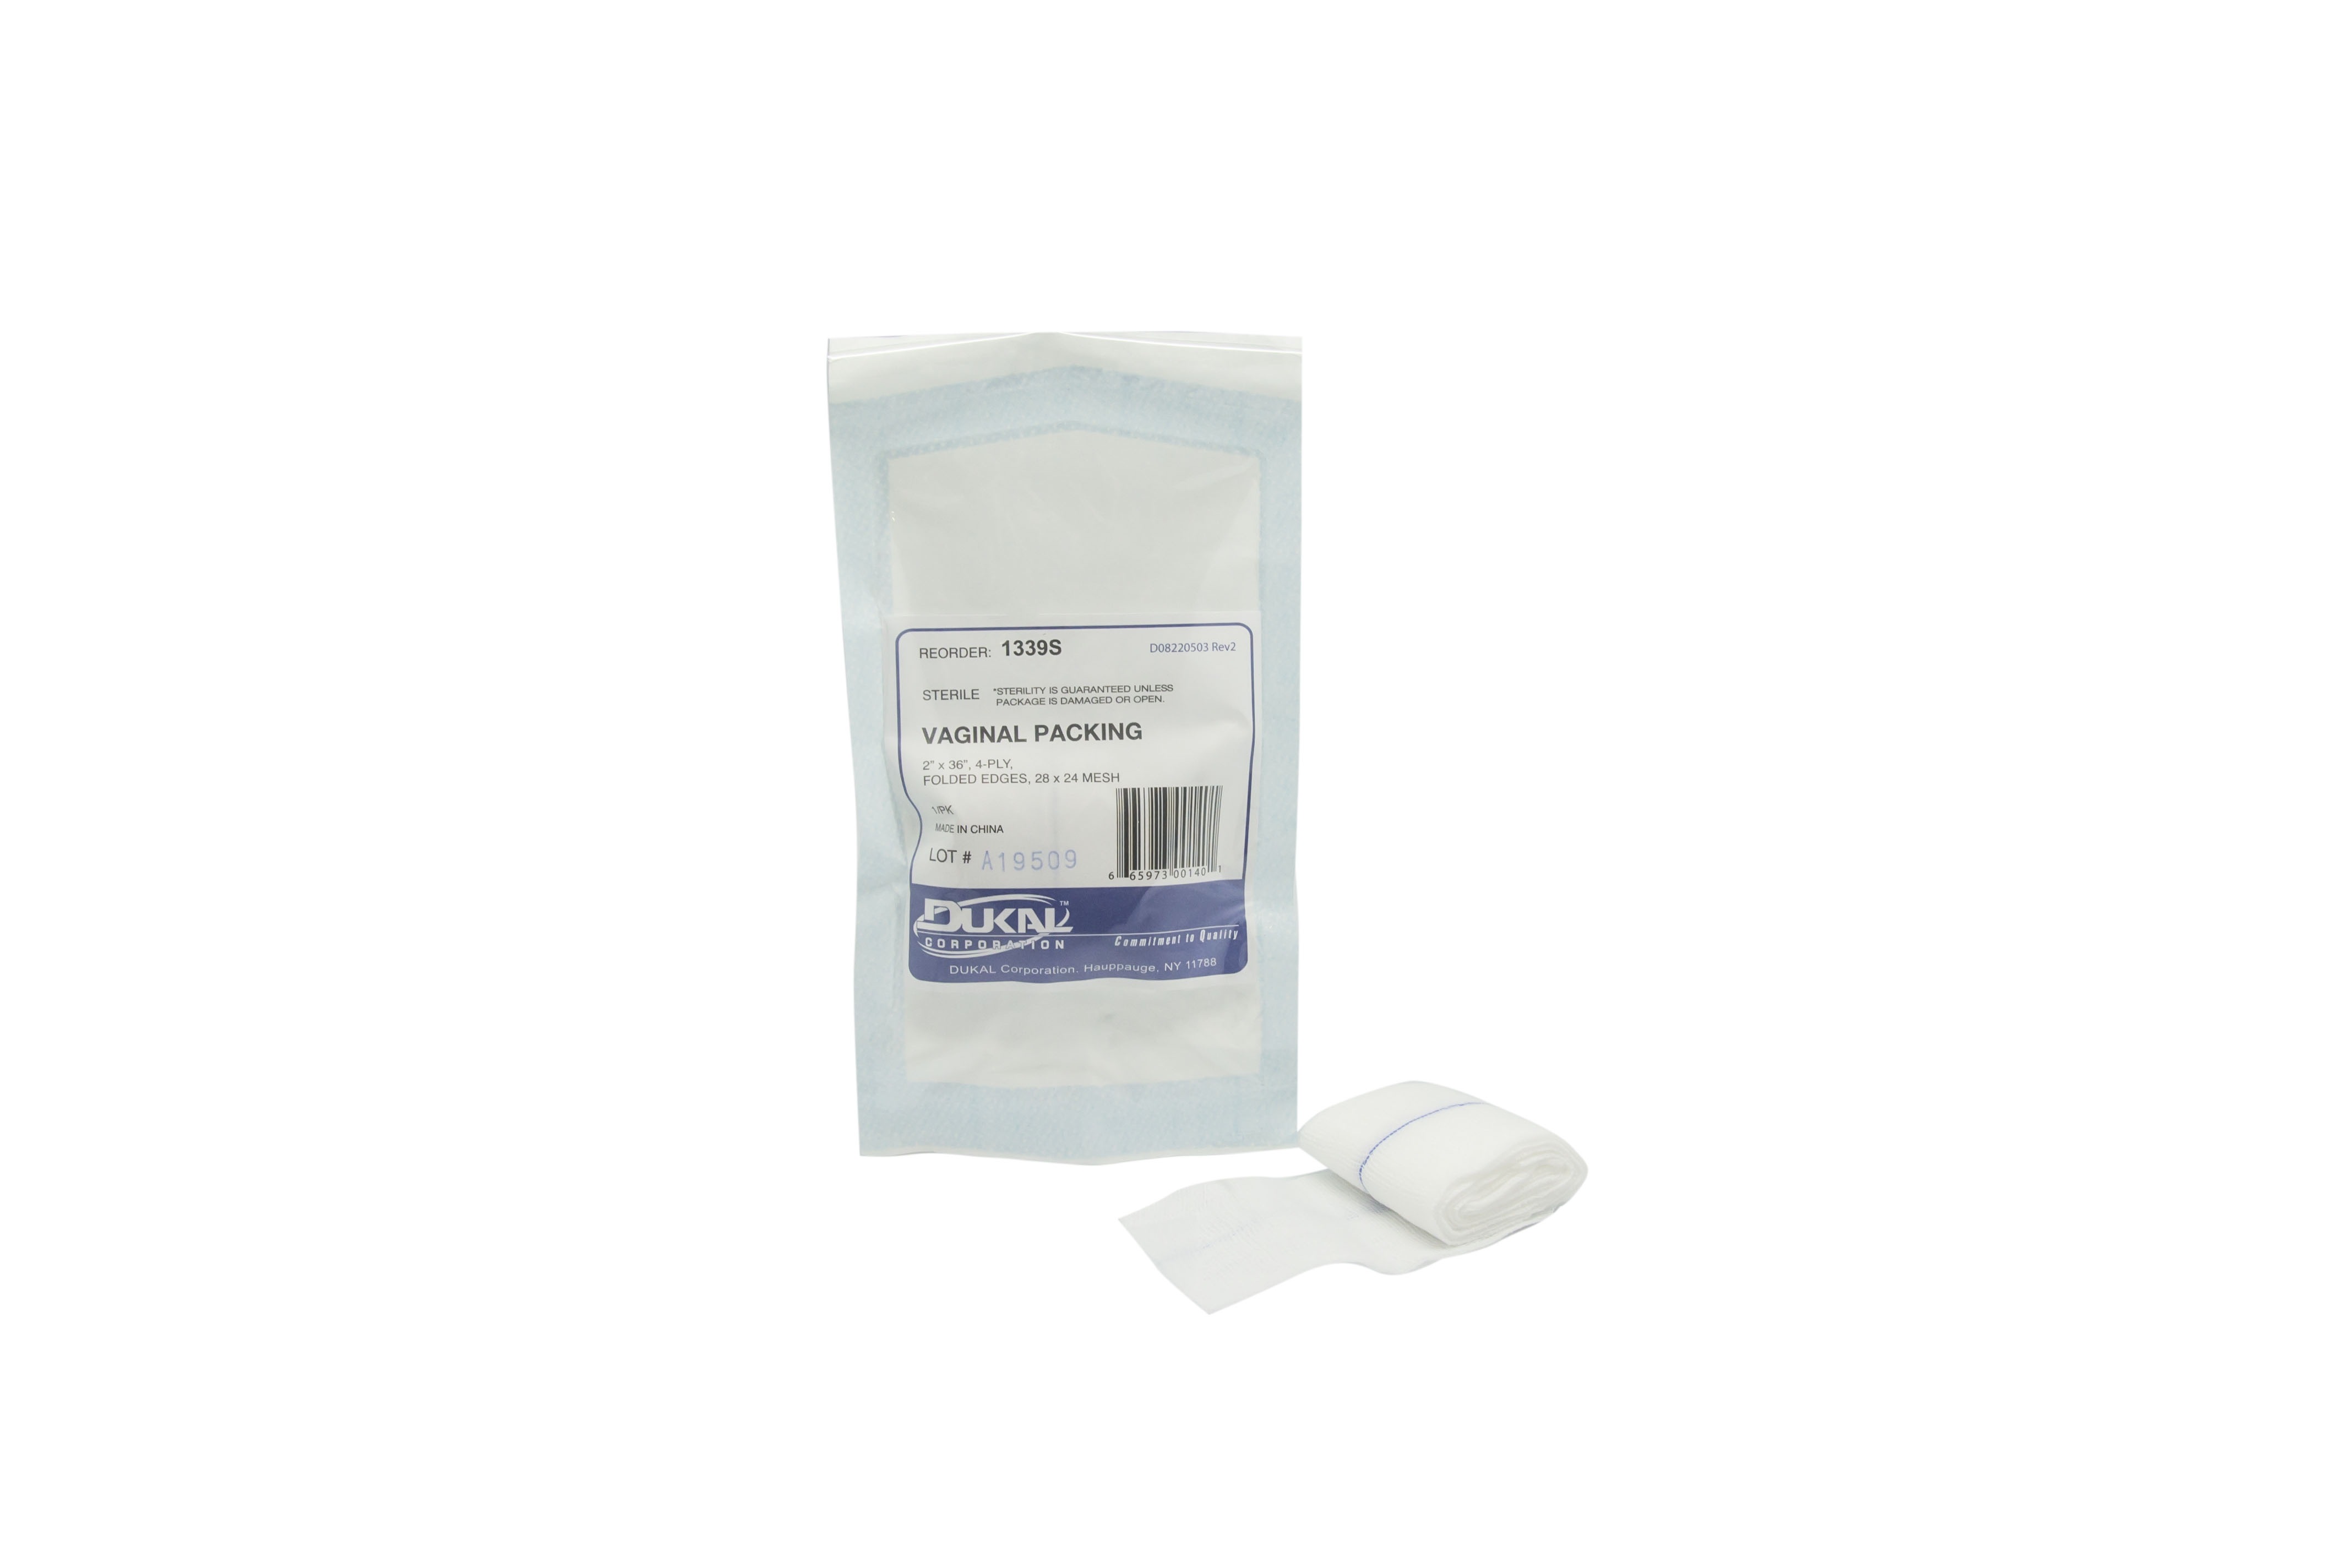 Dukal Sterile Vaginal Packing, 2" X 36", 4-ply, Prewashed